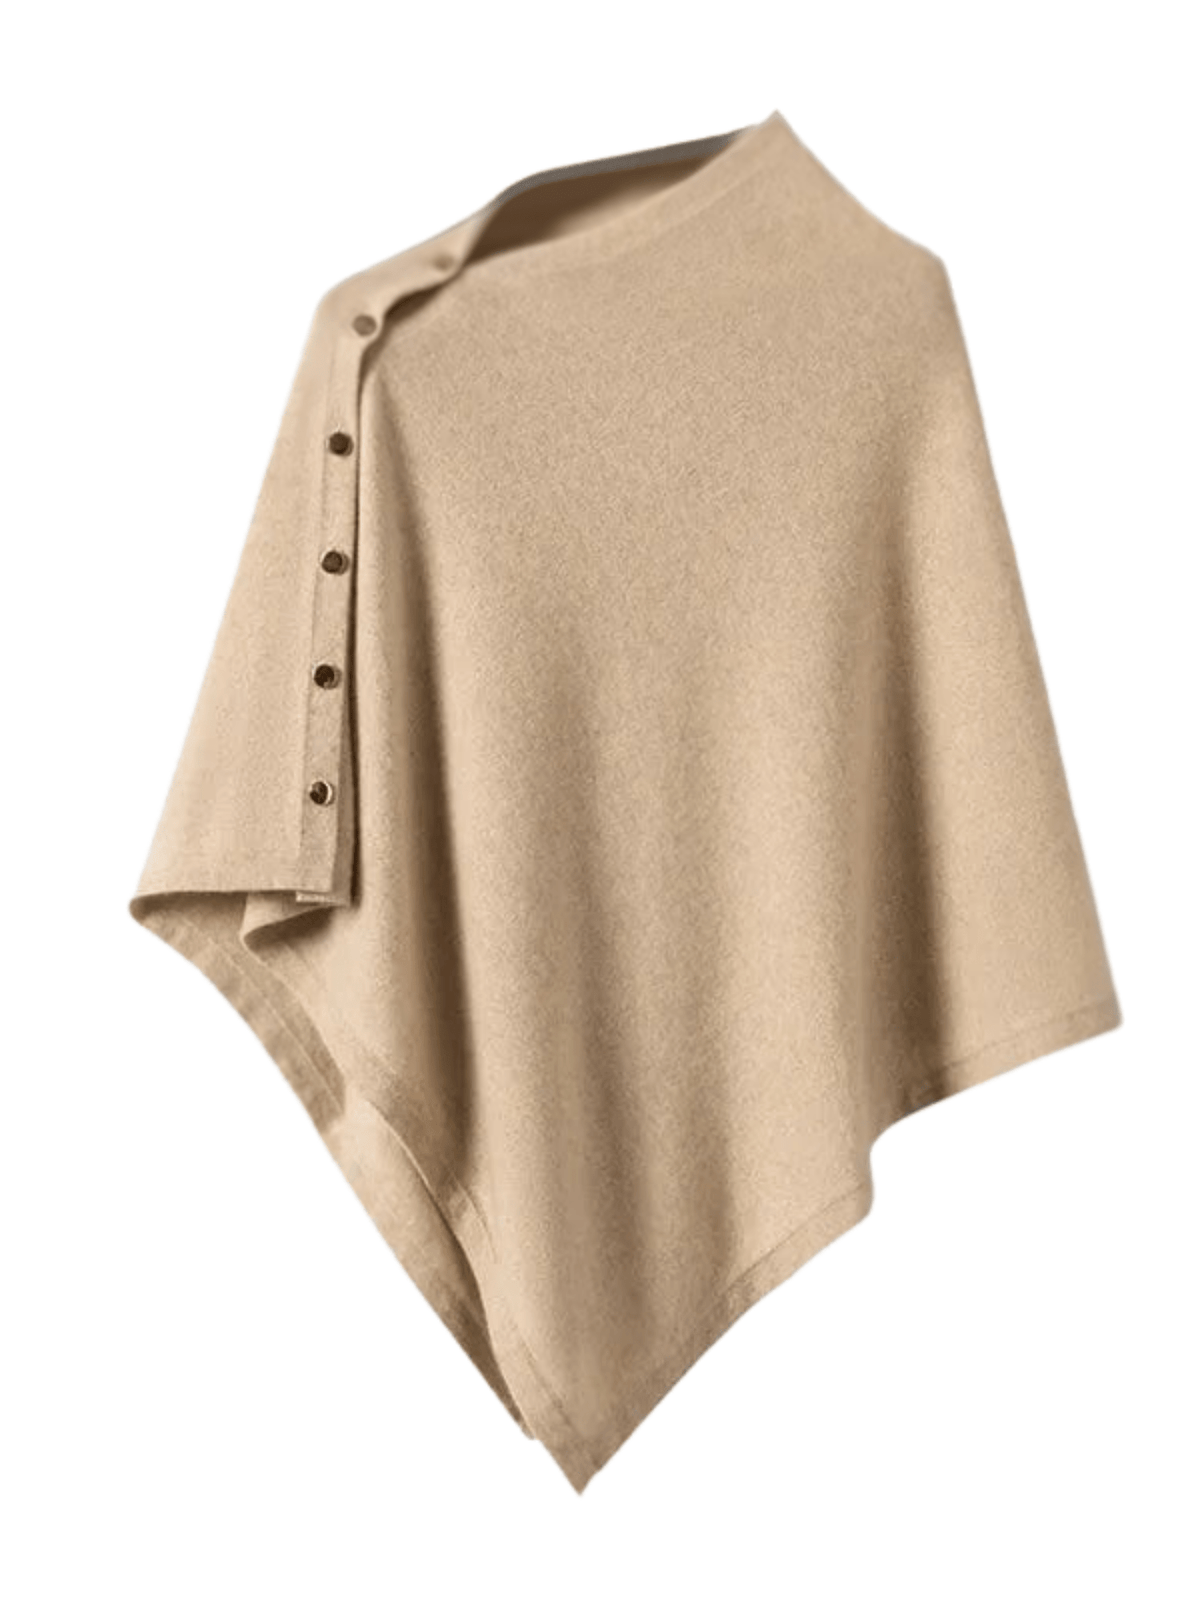 Poncho Femme  Luxe Cachemire  Beige / Une Taille / 100% Cachemire